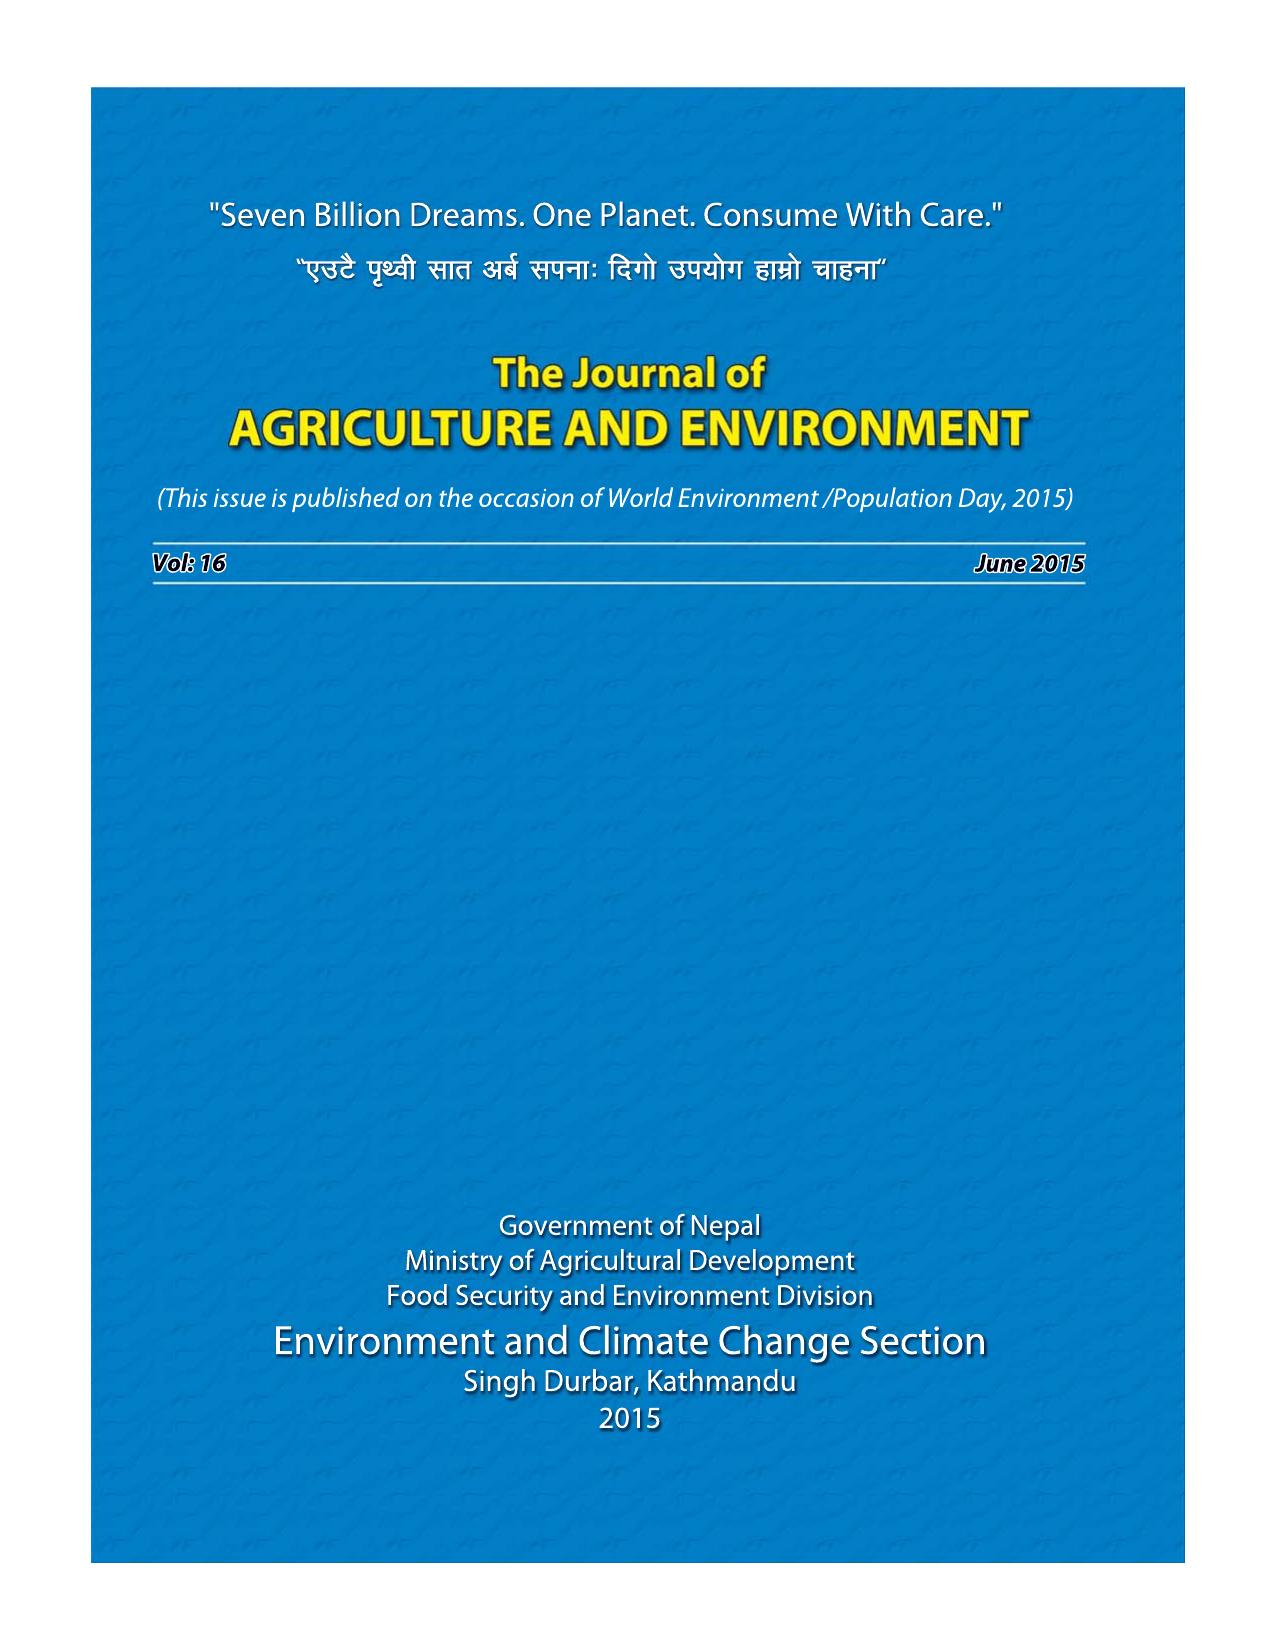 The Journal of Agriculture And Environment